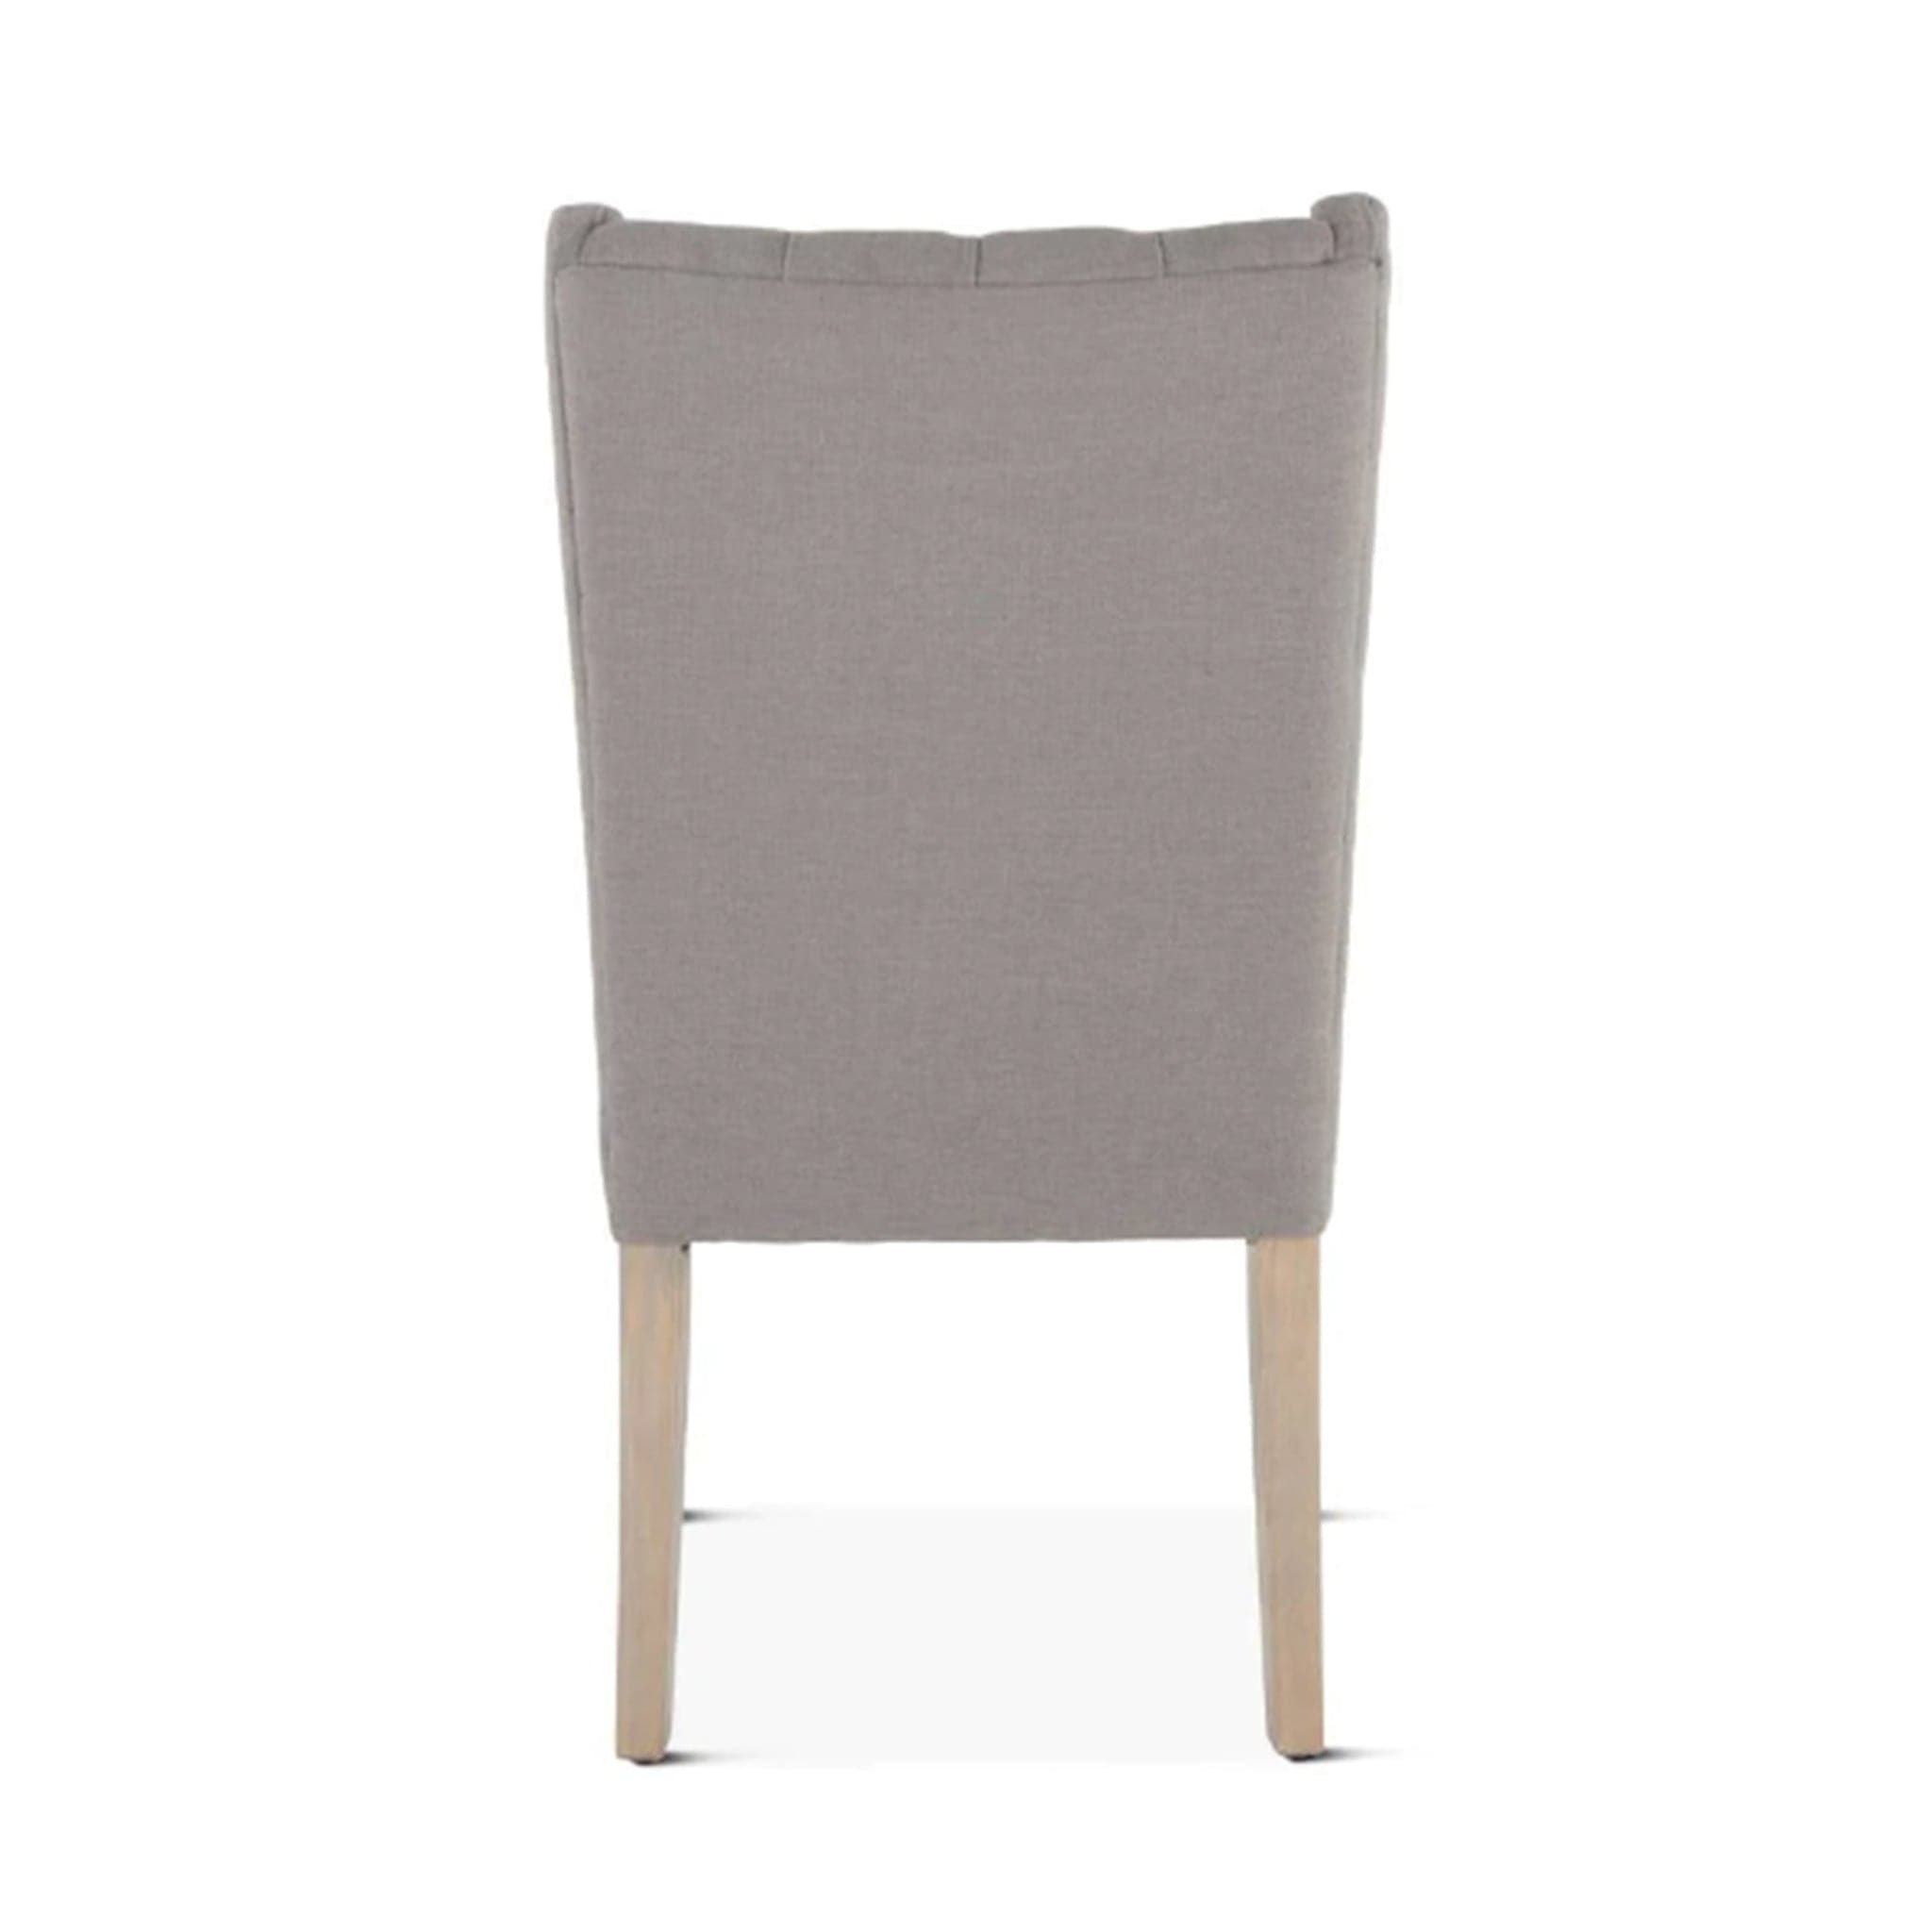 Chloe Dining Chairs with Napoleon Legs, Set of 2